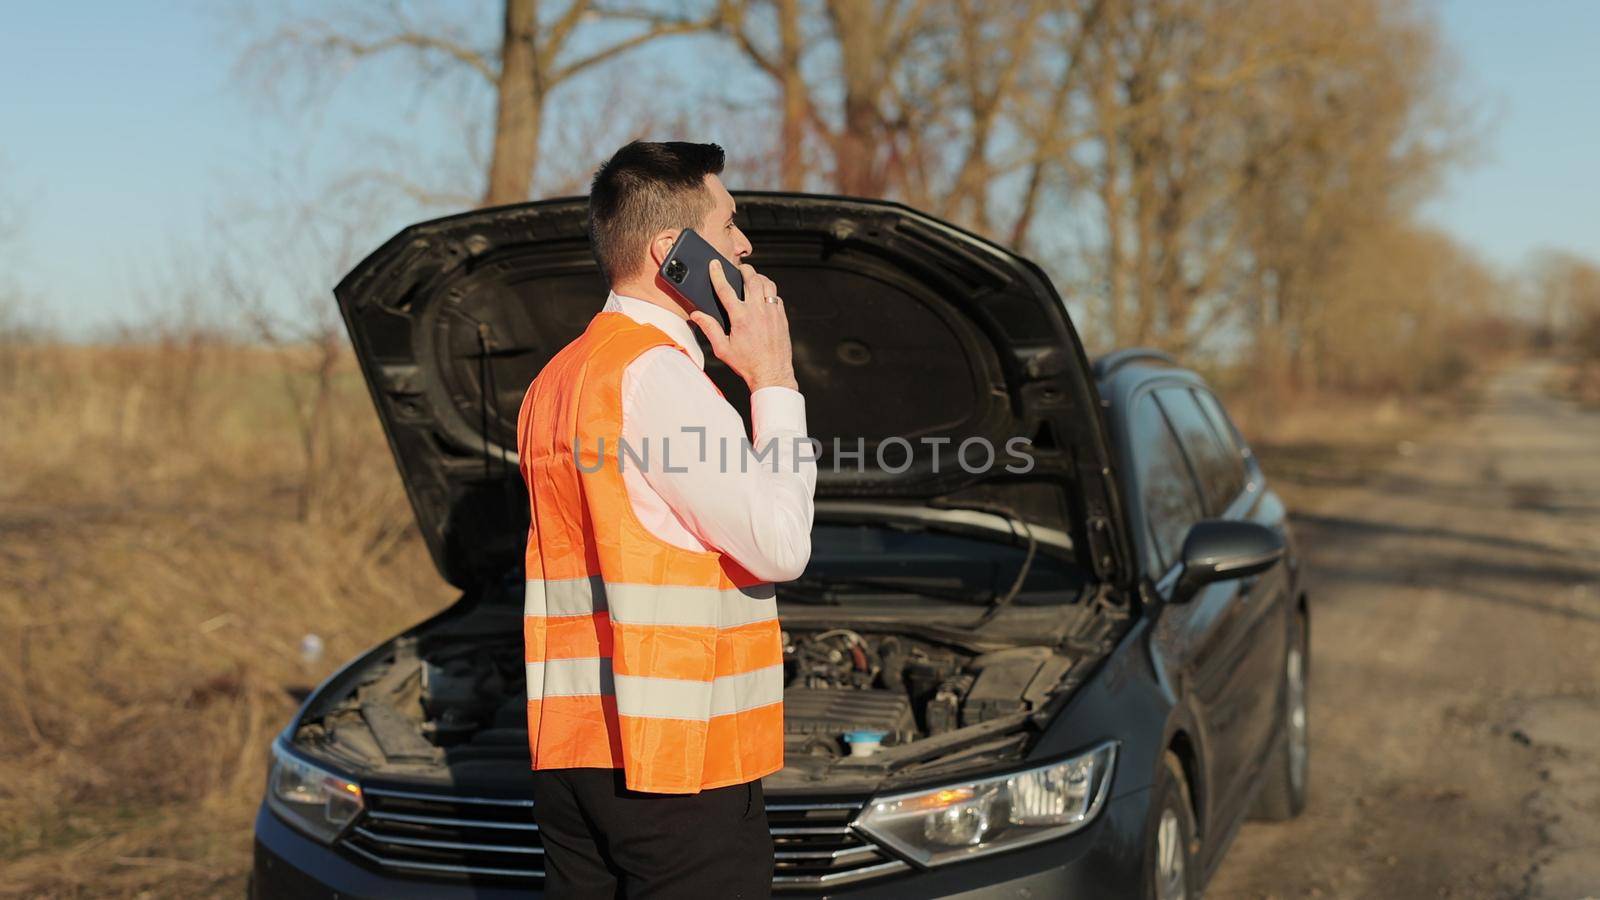 Stranded man with broken down car calls for help. Young man standing speak on phone calling car assistance services, near the broken car opened the hood look road help repair. Emergency stop sign by uflypro